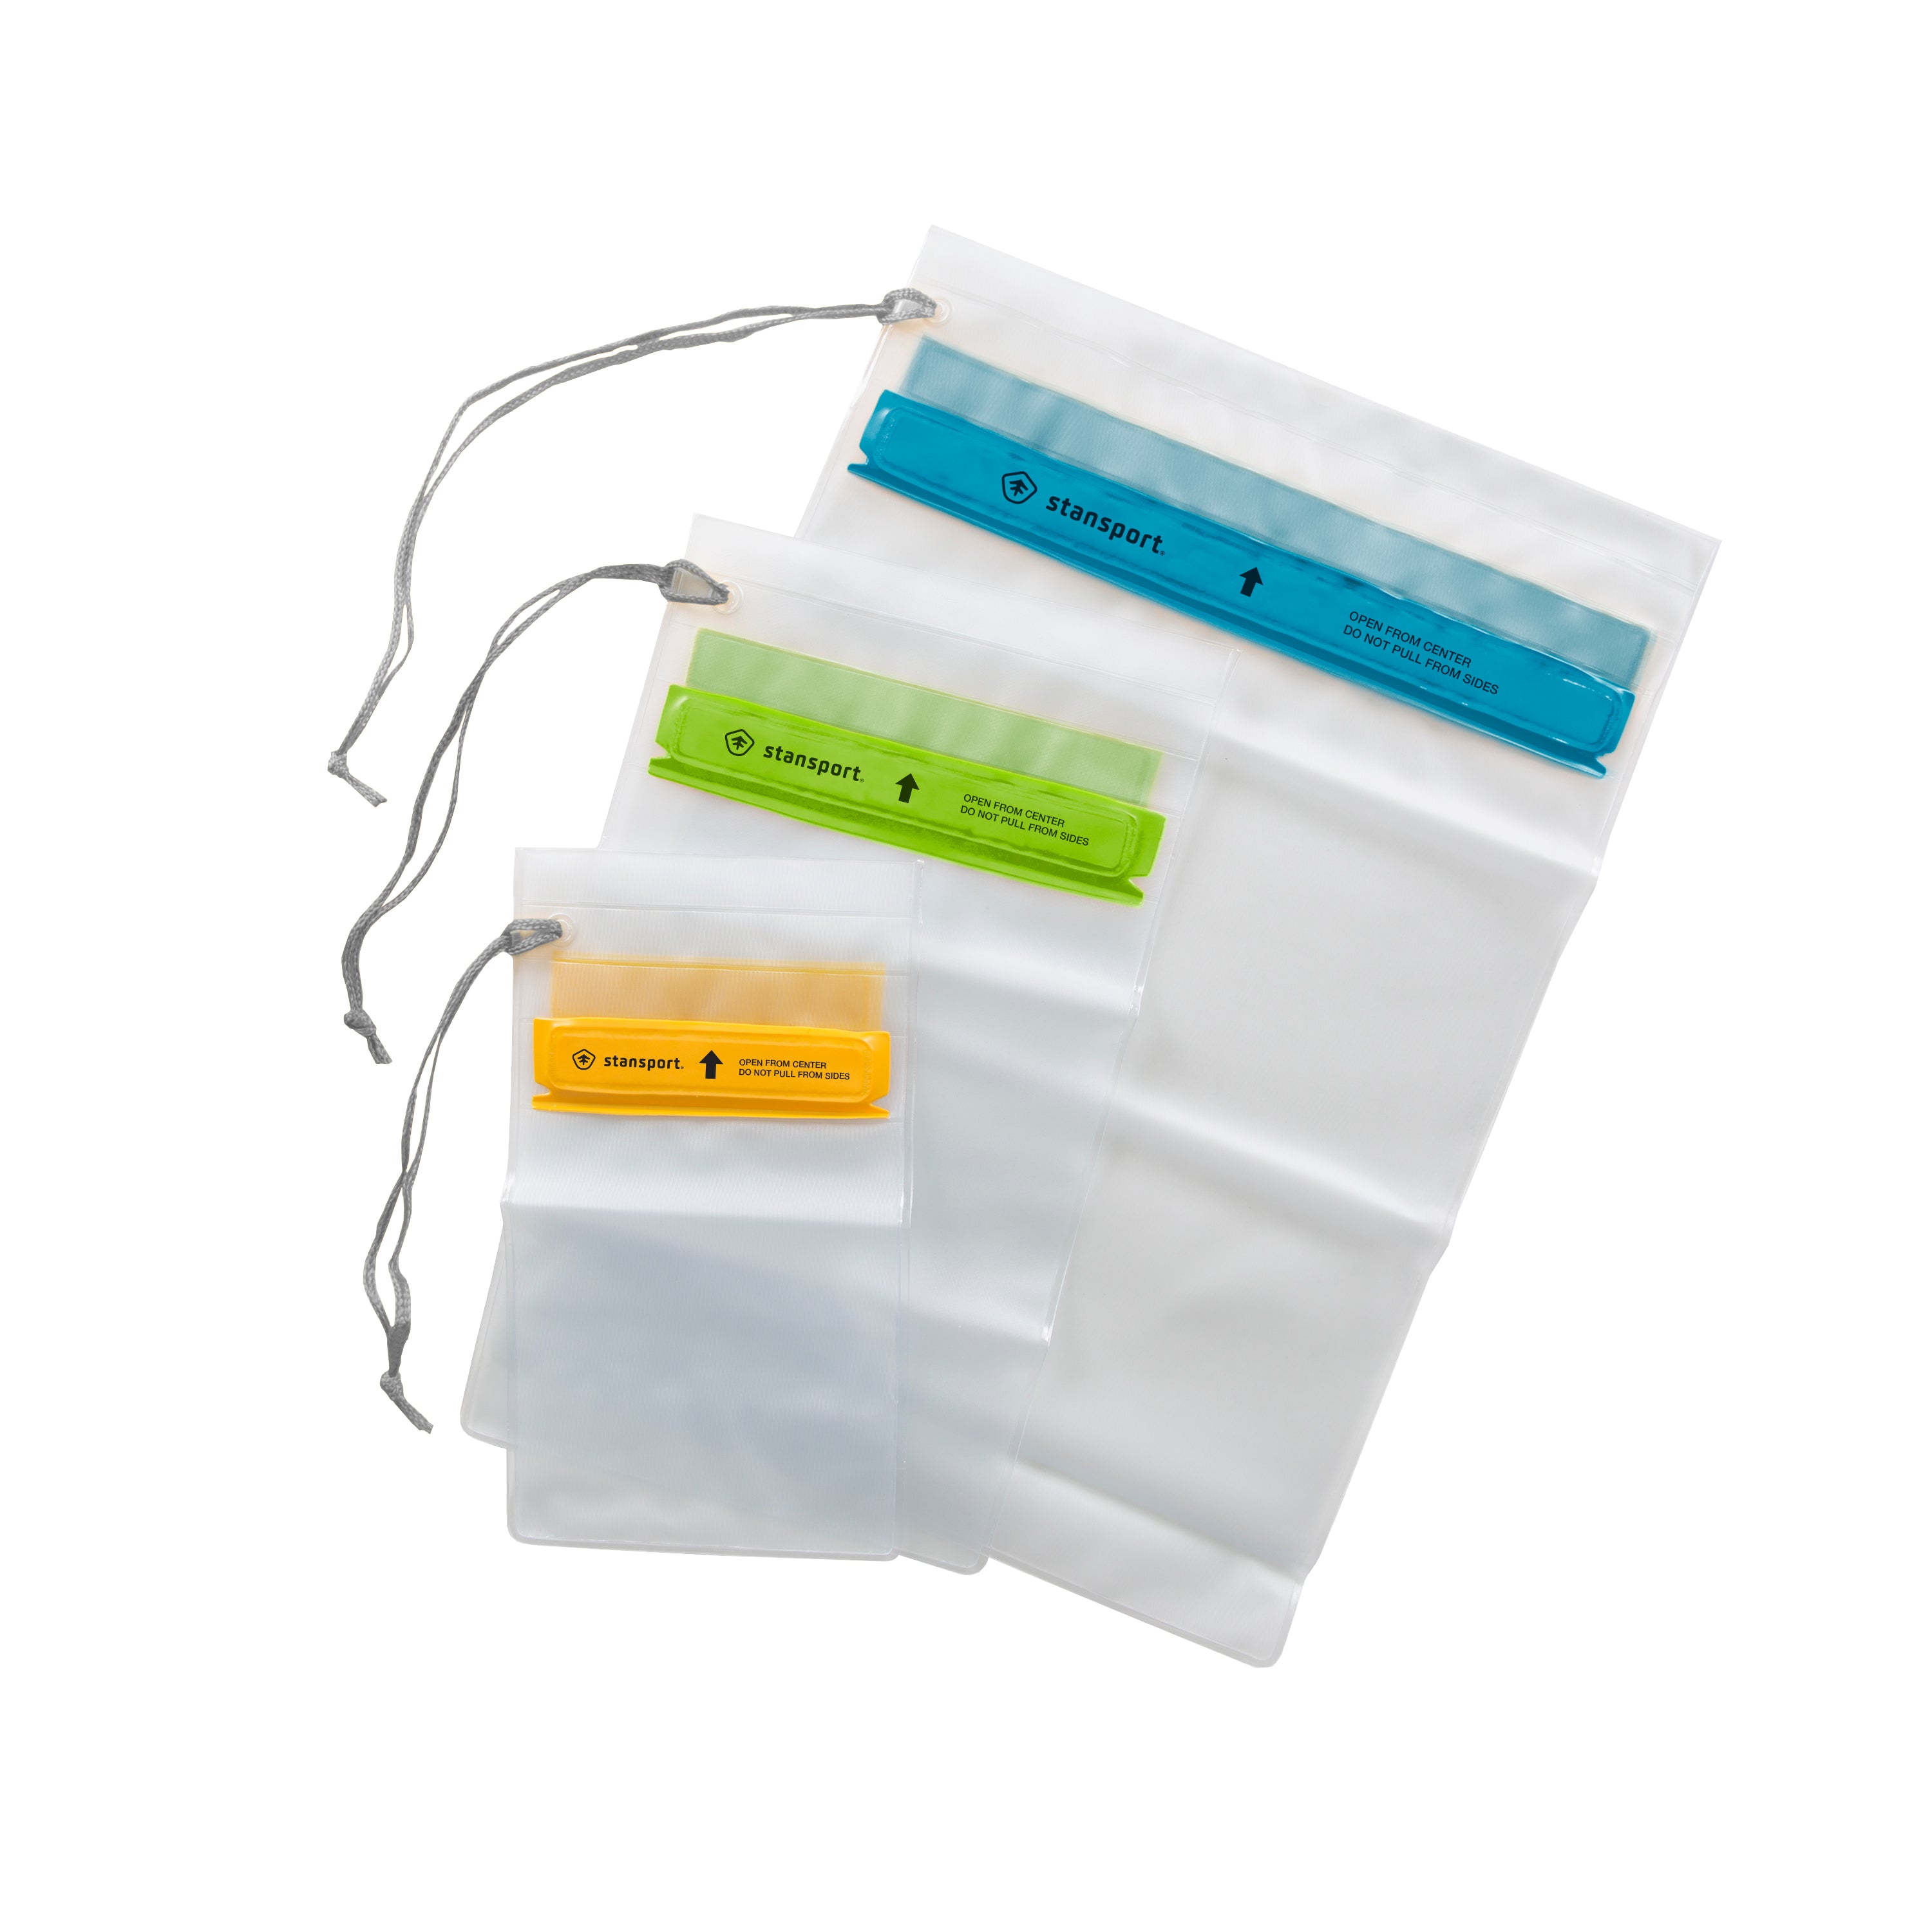 Waterproof Pouches - 3 Pieces Per Set-eSafety Supplies, Inc